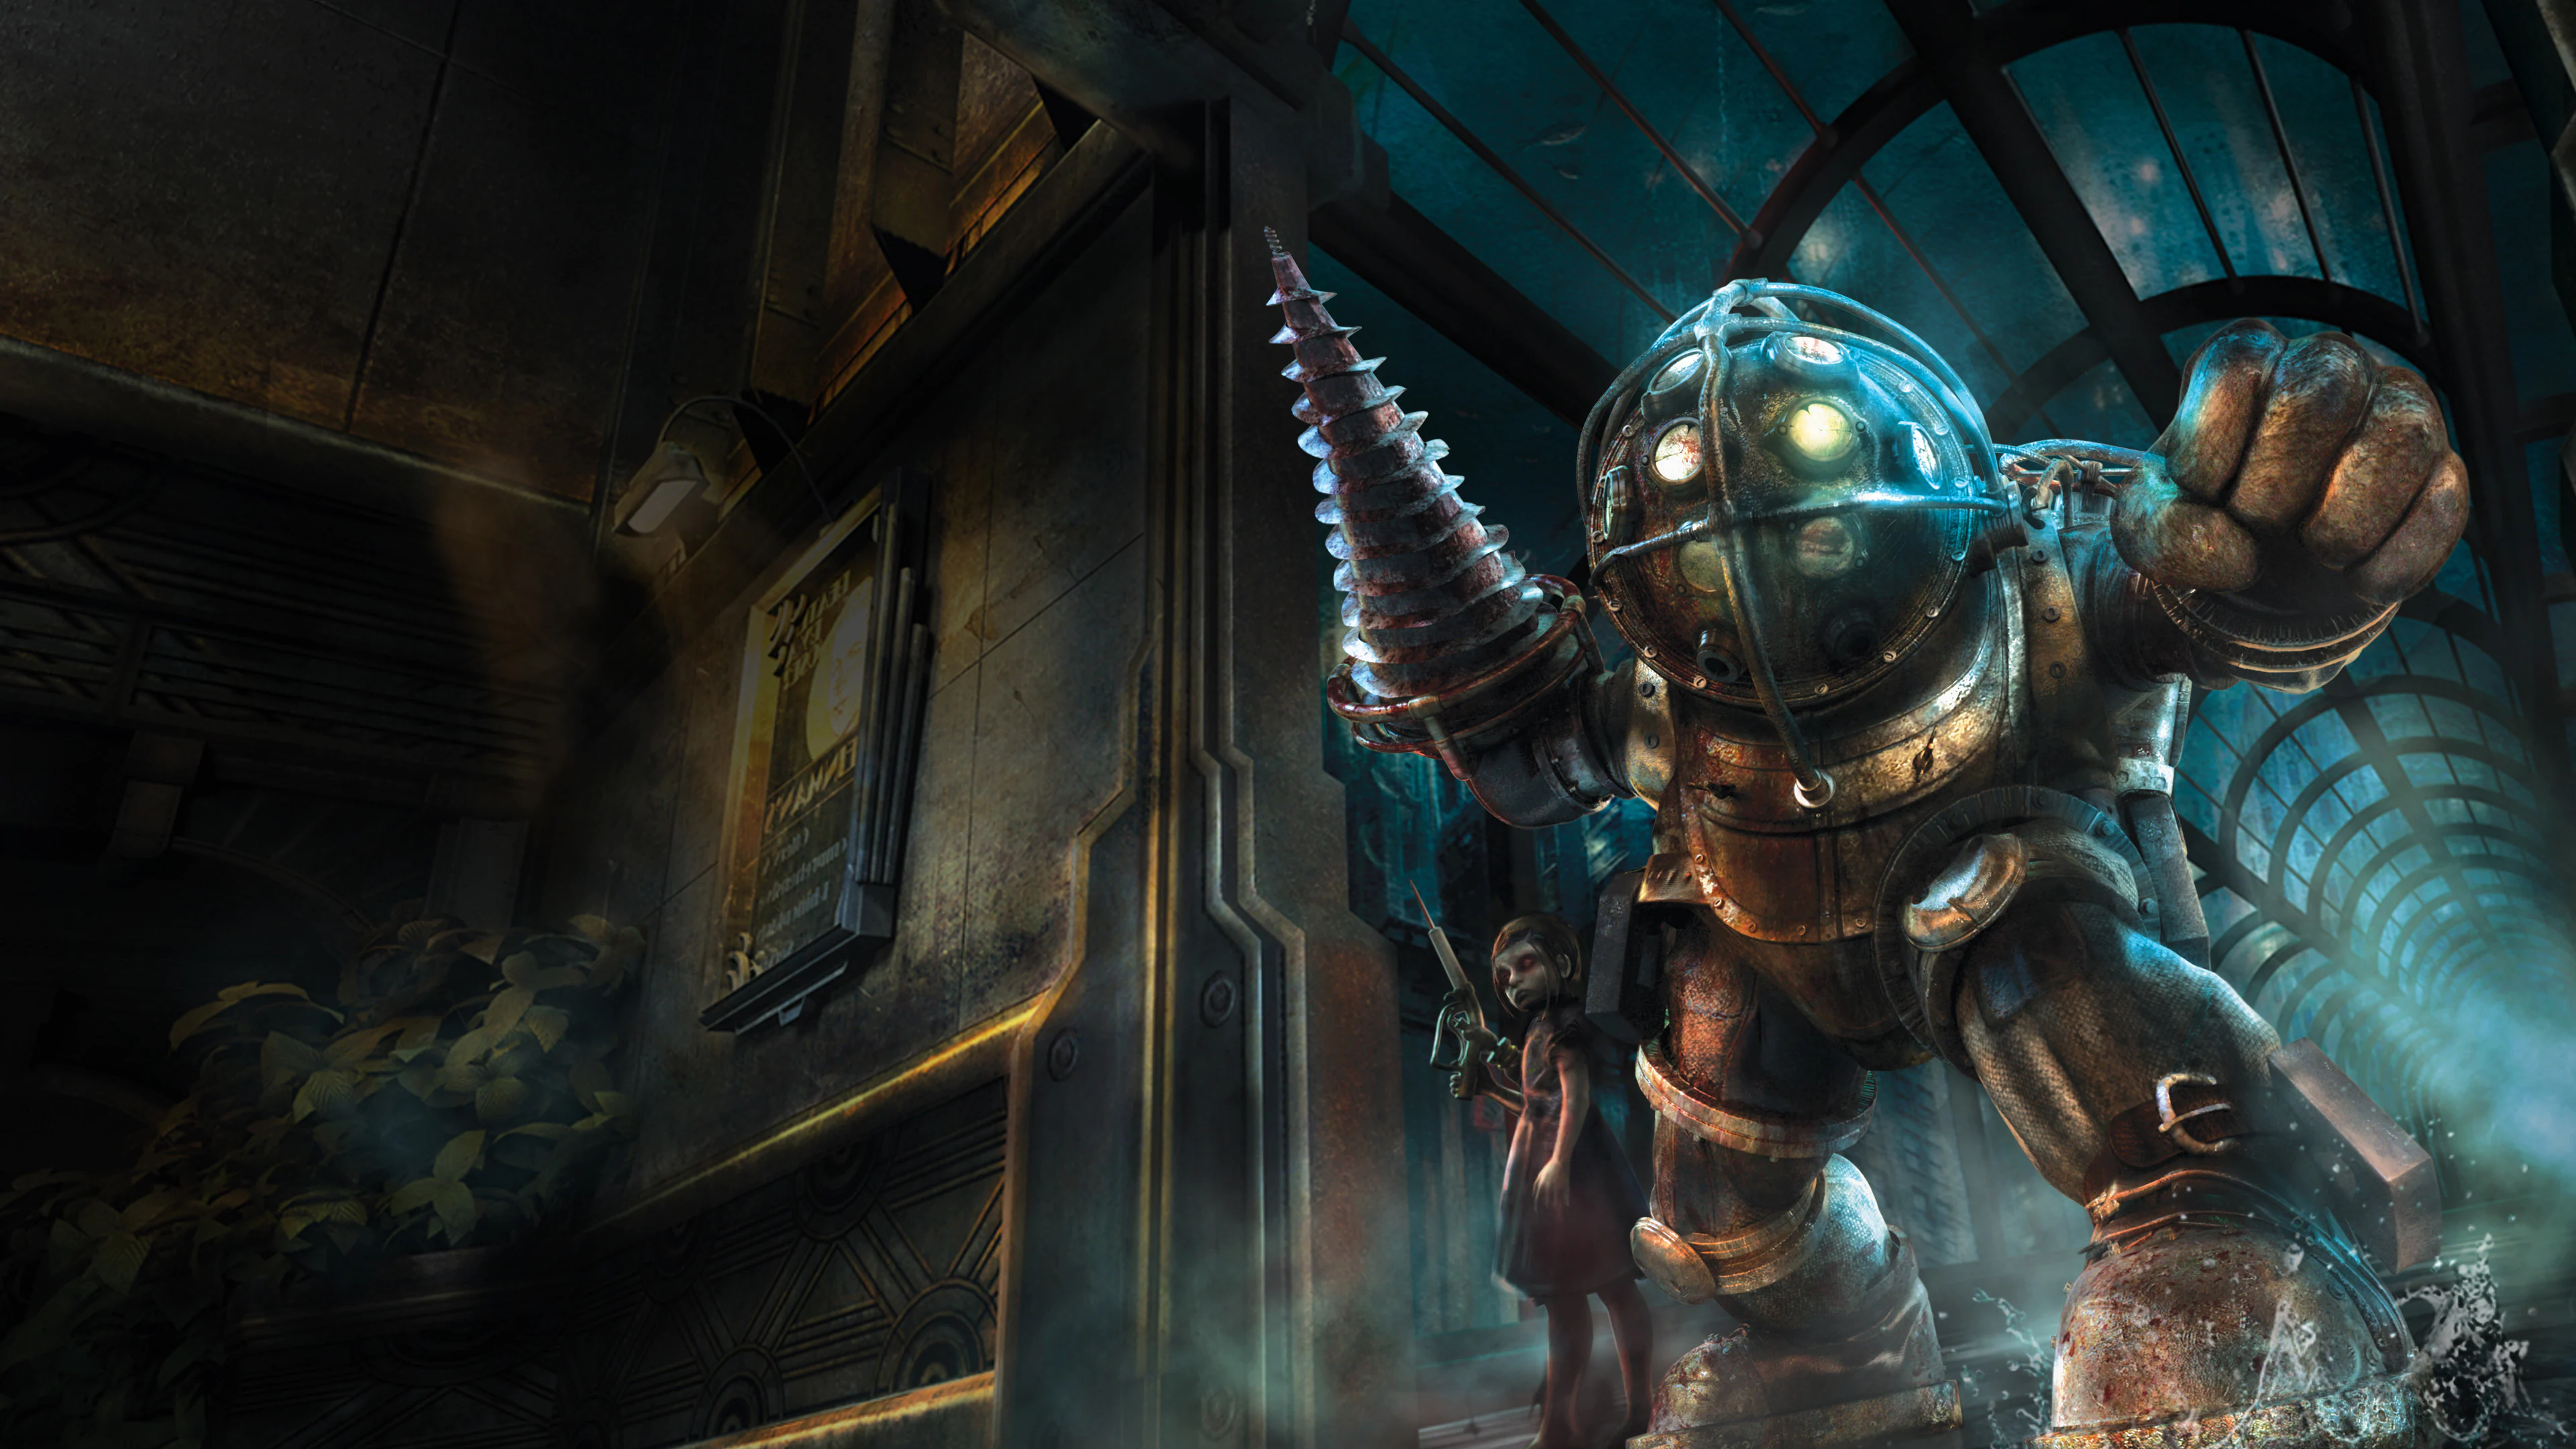 Netflix cuts the budget of BioShock film adaptation: now we can expect a "more personal story"